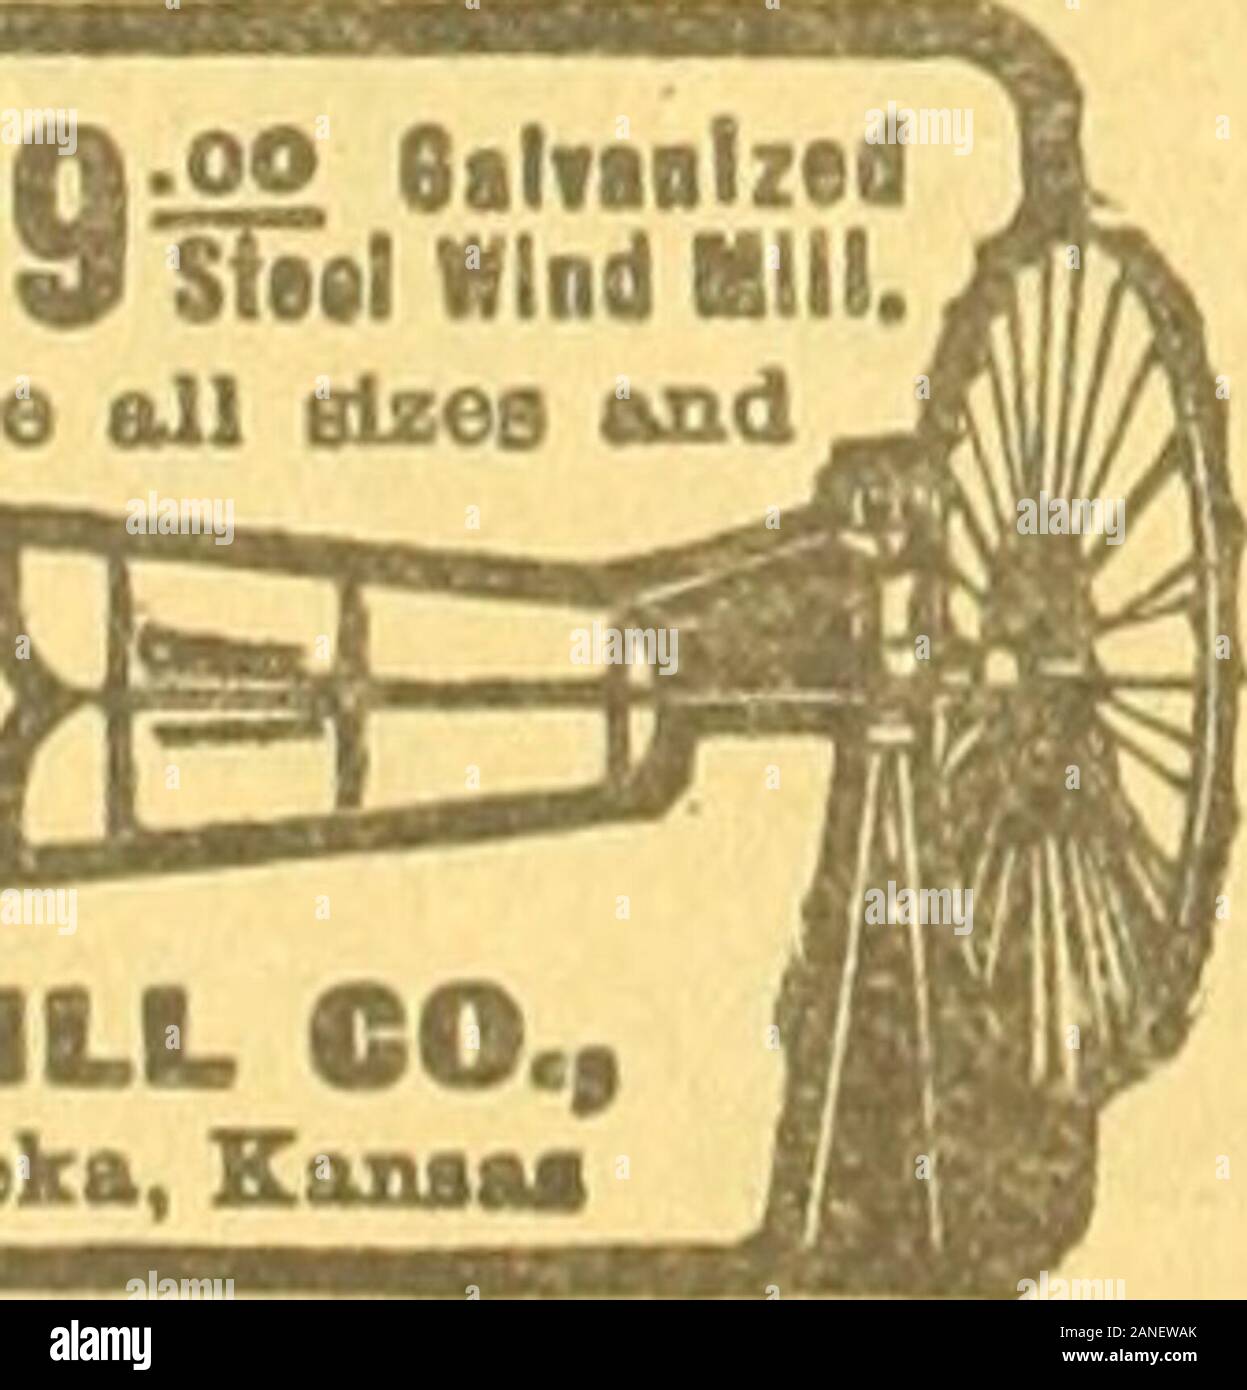 Oklahoma farmer . Jrlndar. I Ileal Wind I Wo manufacture all sizes and,styles. It will apay you to in-vestigate. Write for catalog and Iprice llsU CUBROE WIND MILL CO., Sevanth Bt„ Topeka, Kansas. INDIAN RUNNER DUCK CULTURE M—iBt illustrated duck book published. Telia to hatch and care for greatest egg produe*fowl on earth. How to tret a start.Quotes low prices on stock and eggs of?finest strains. Sent for £ cents postage.Berrys Farm. Box 159. Clarinda. low* lng tL{ Best Paying Varieties wsf Hardy Northern raised Chickens,?i i i.„« Ducks, (loese and Turkeys. Pure-bred heaviest laying strains Stock Photo